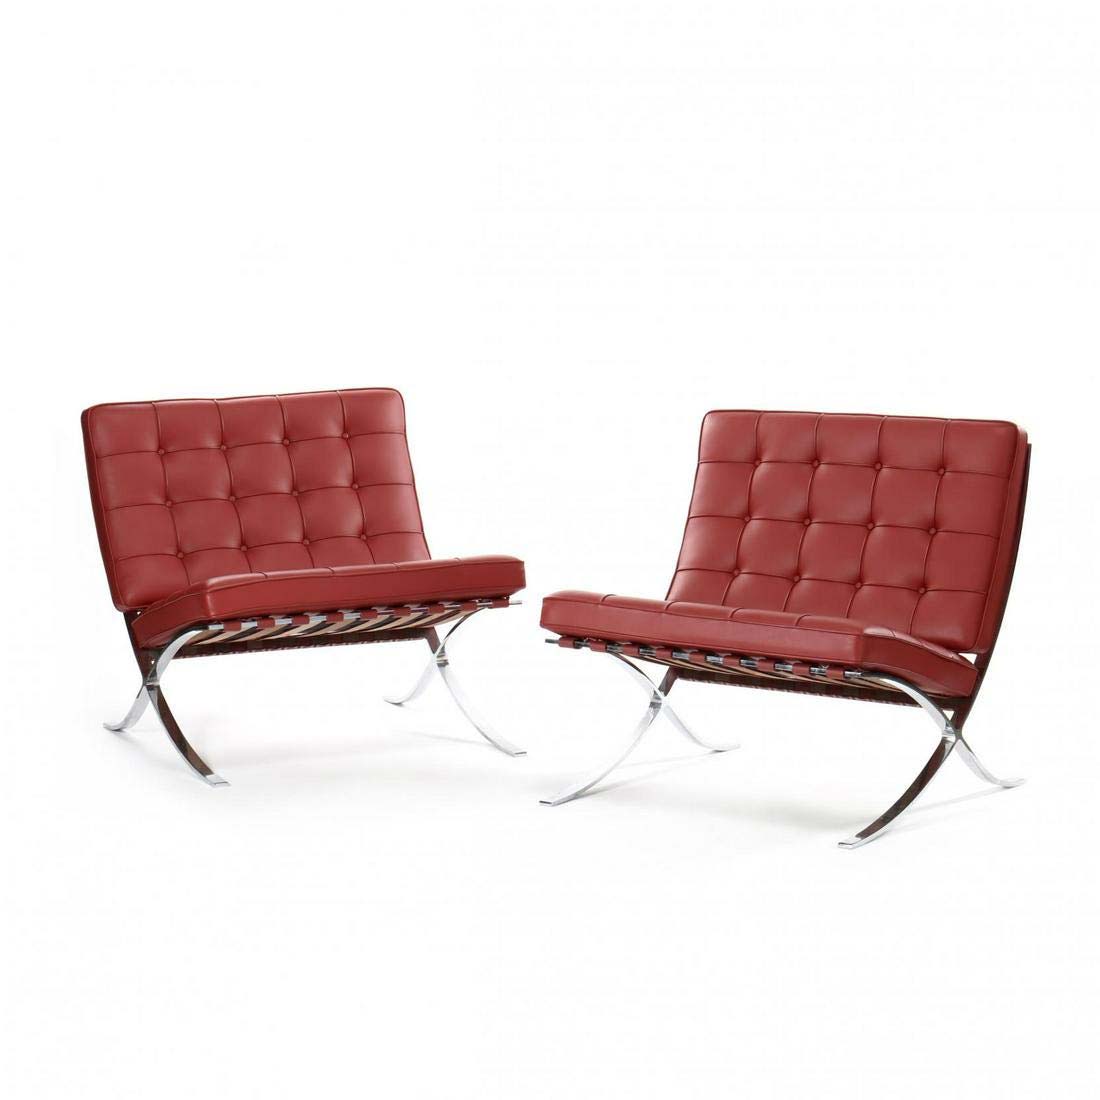 A pair of Barcelona chairs by Ludwig Mies van der Rohe brought $8,500 plus buyer’s premium in September 2019 at Leland Little Auctions. Photo courtesy of Leland Little Auctions and LiveAuctioneers